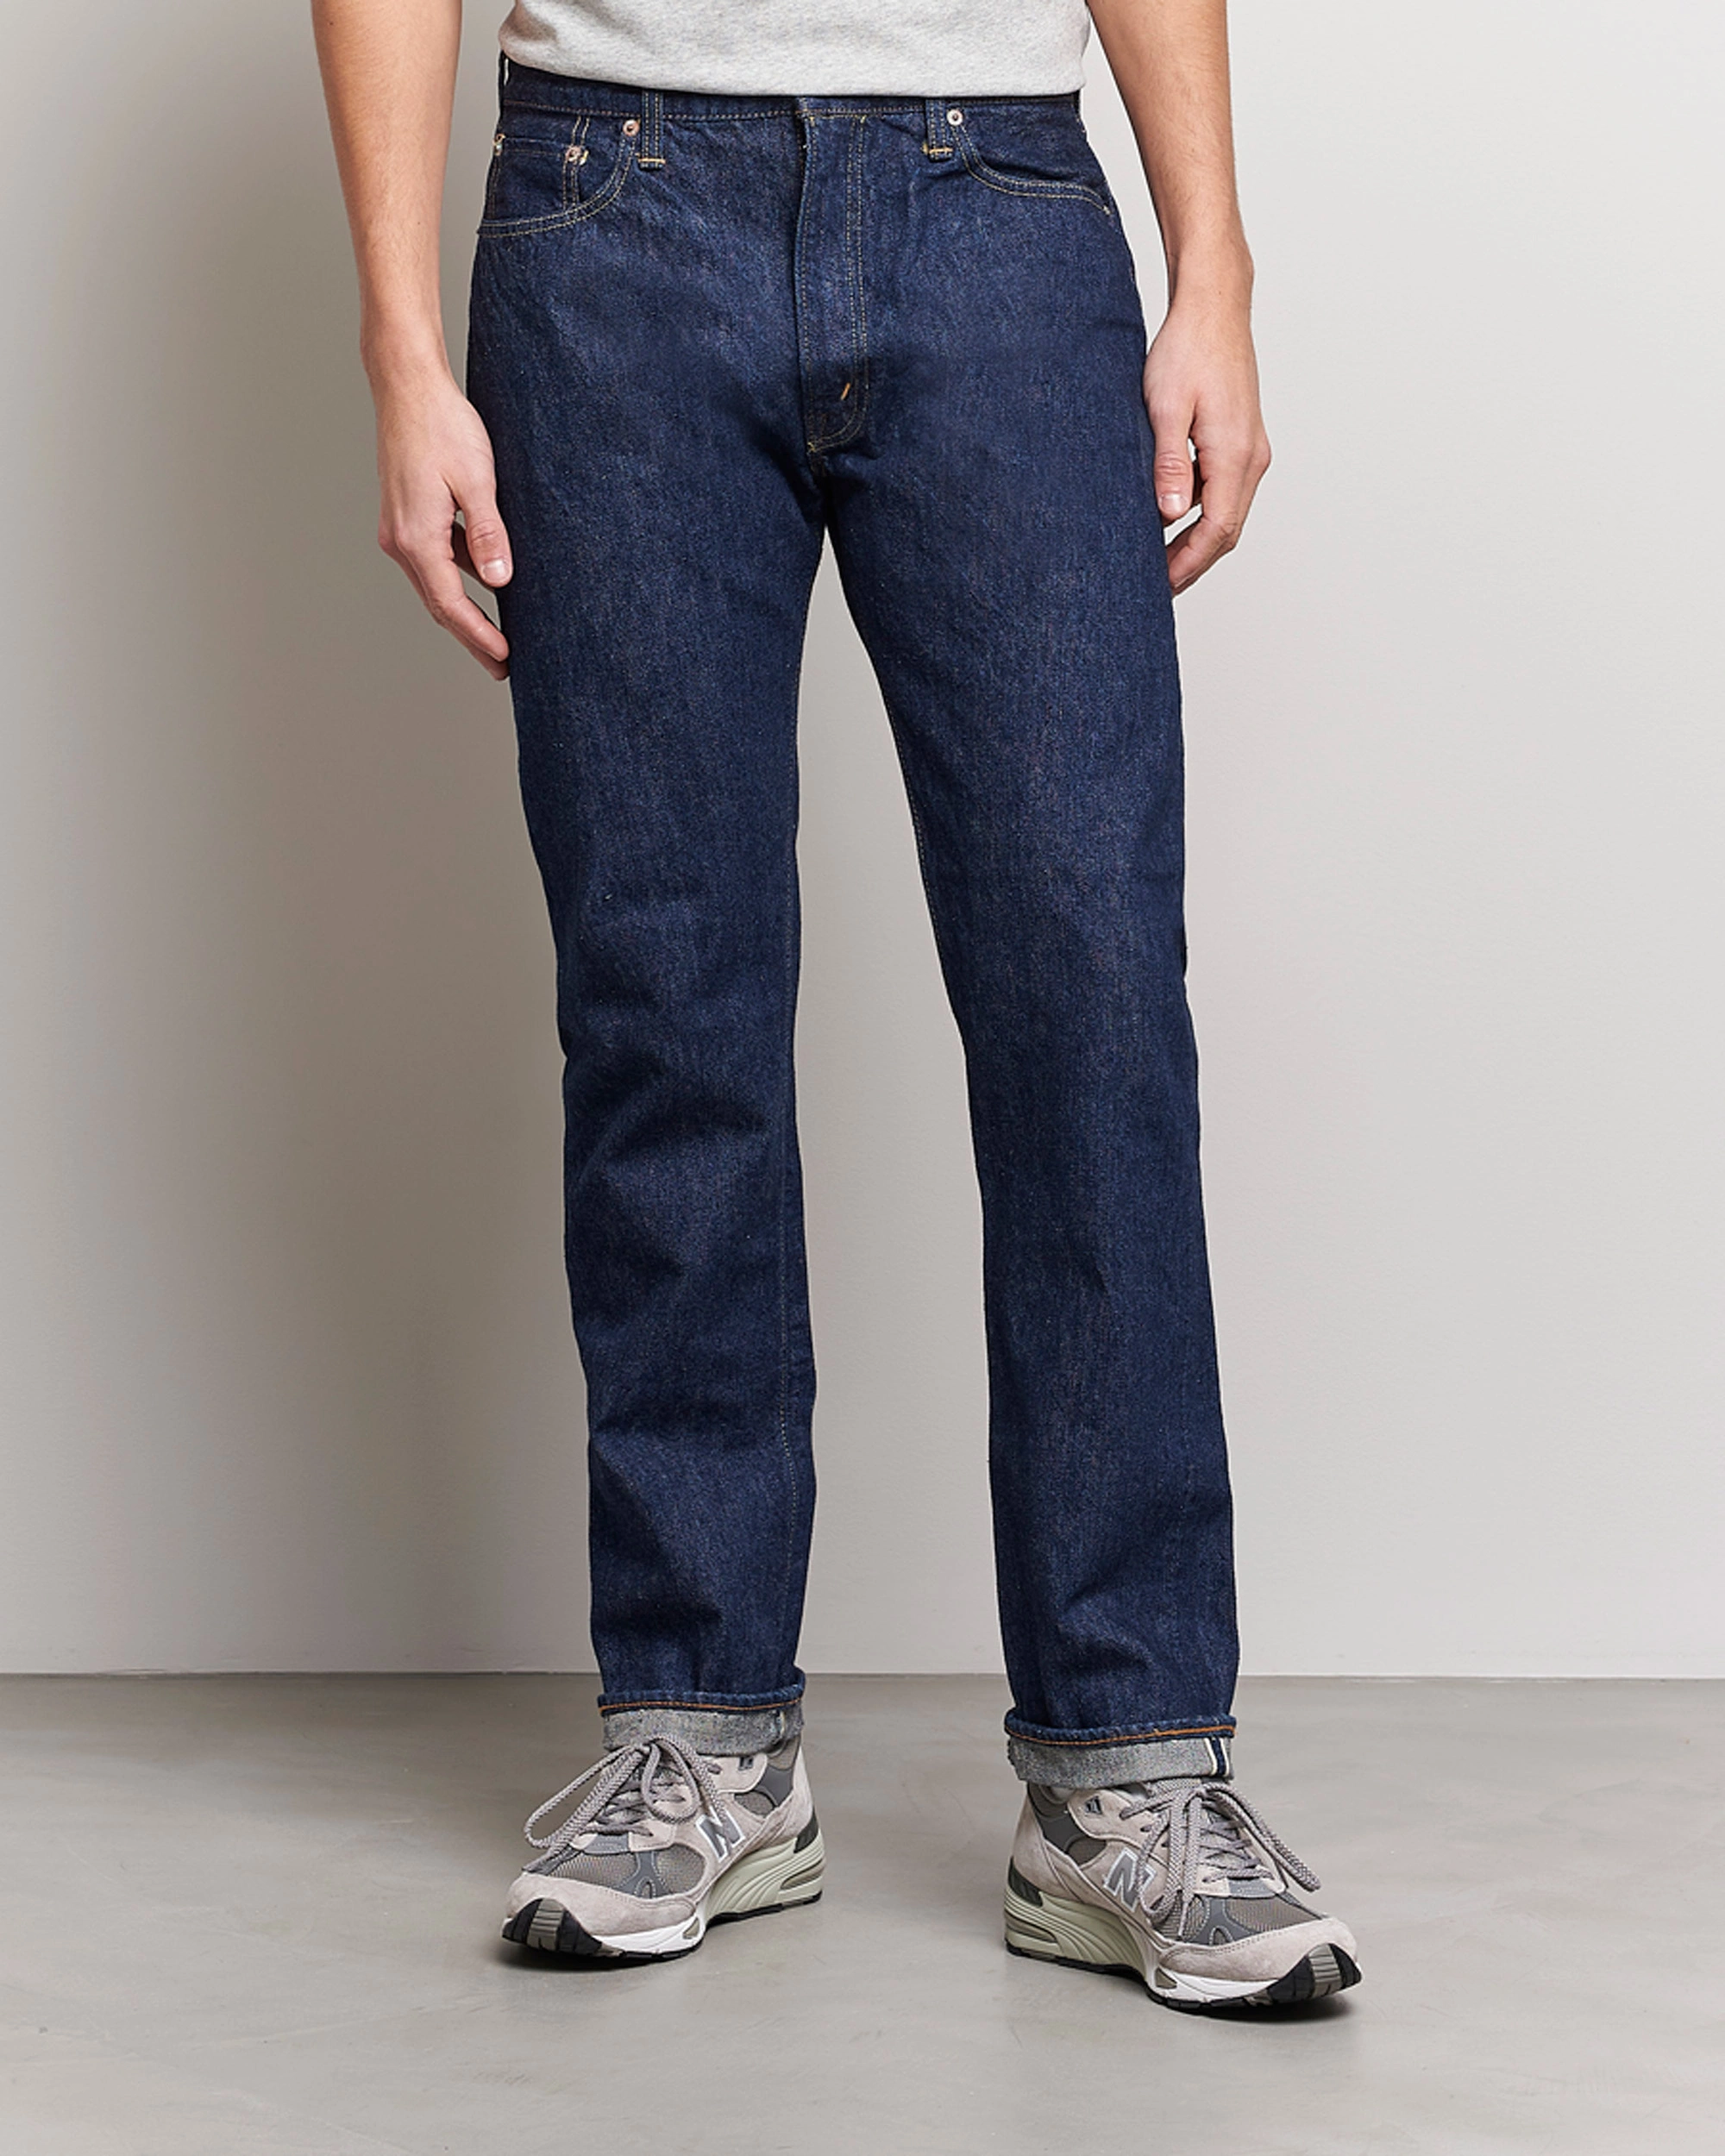 Mies | orSlow | orSlow | Tapered Fit 107 Selvedge Jeans One Wash